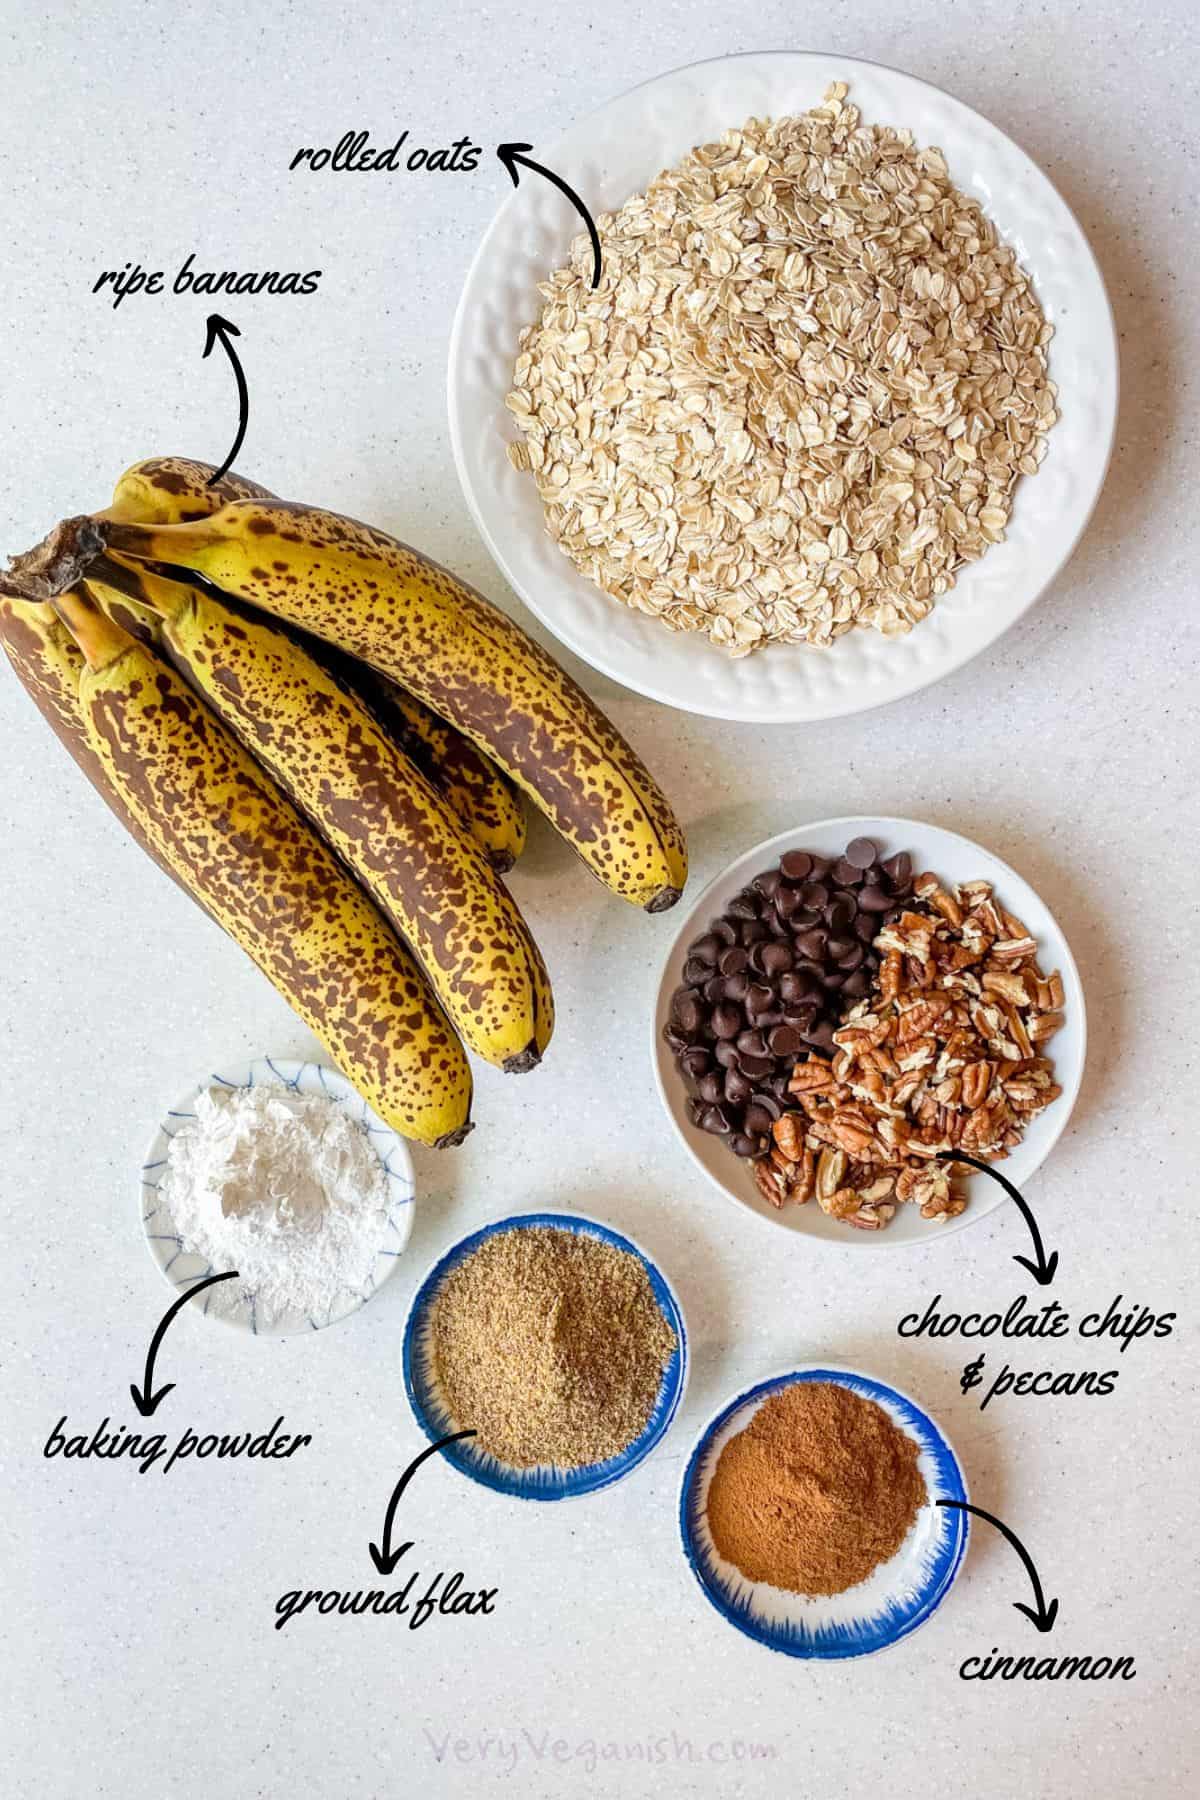 Ingredients on counter: ripe bananas, rolled oats, baking powder, ground flax, cinnamon, chocolate chips and pecans